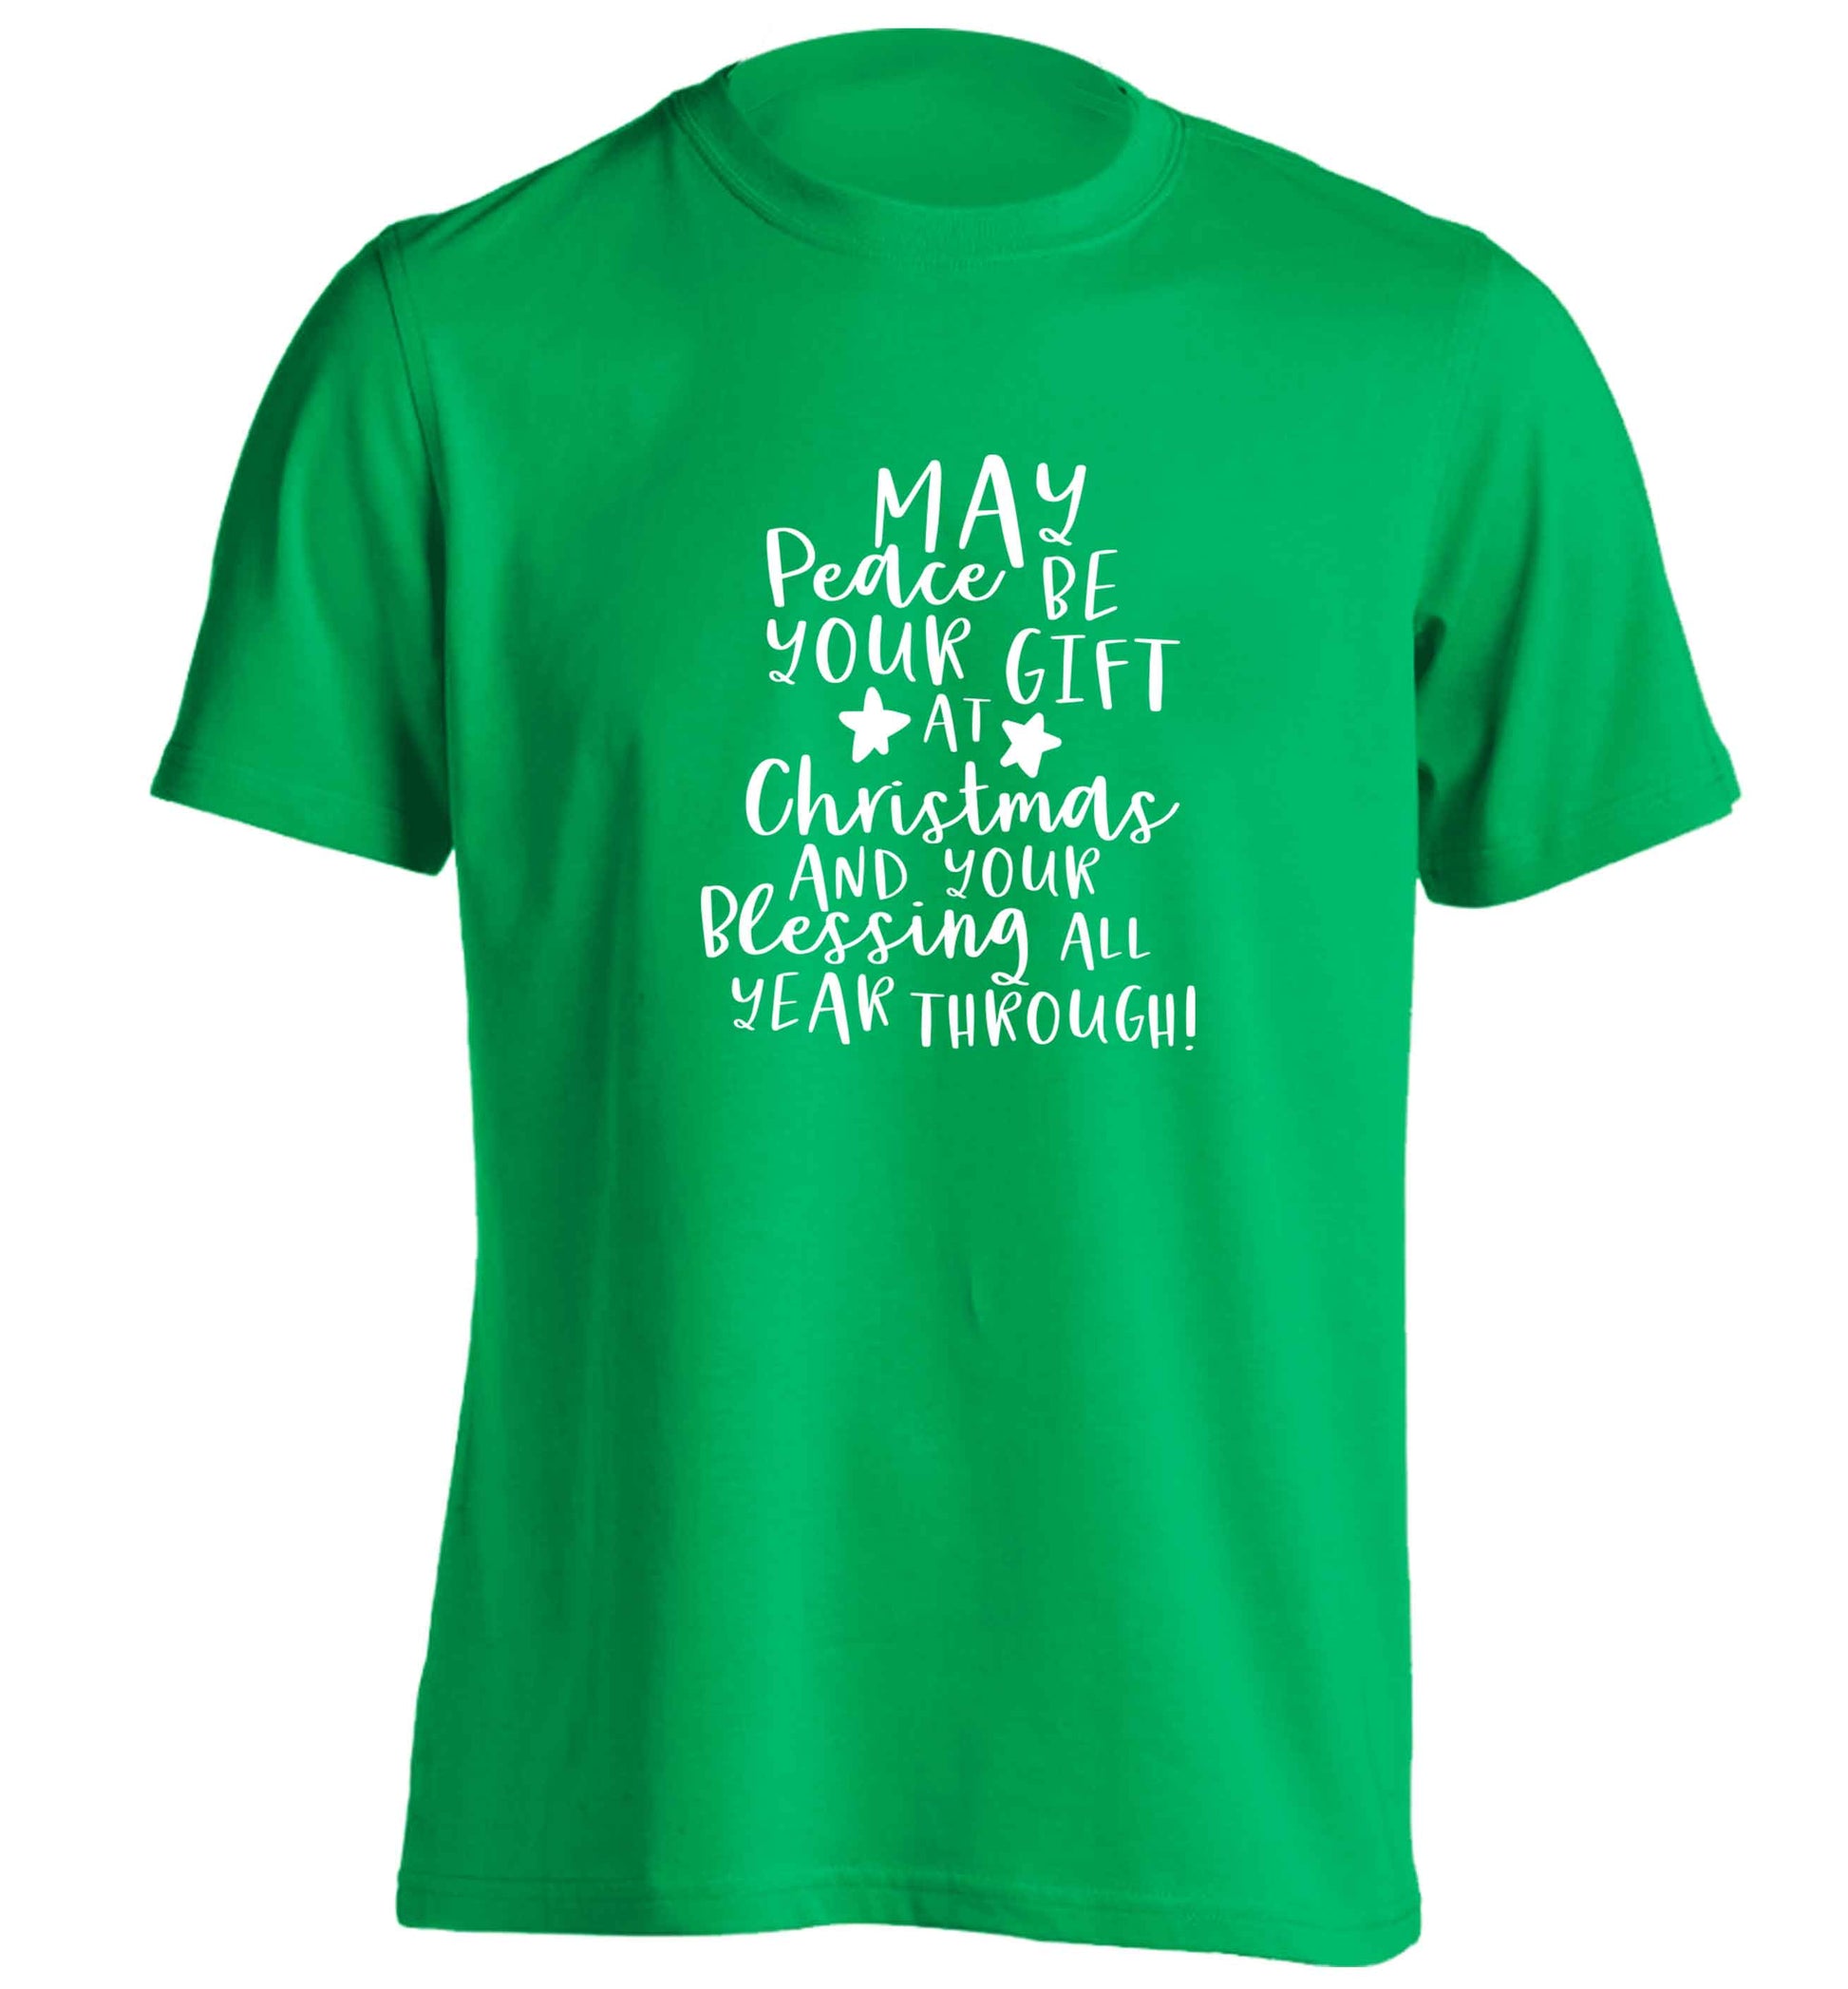 Peace be your Gift at Christmas Gift adults unisex green Tshirt 2XL